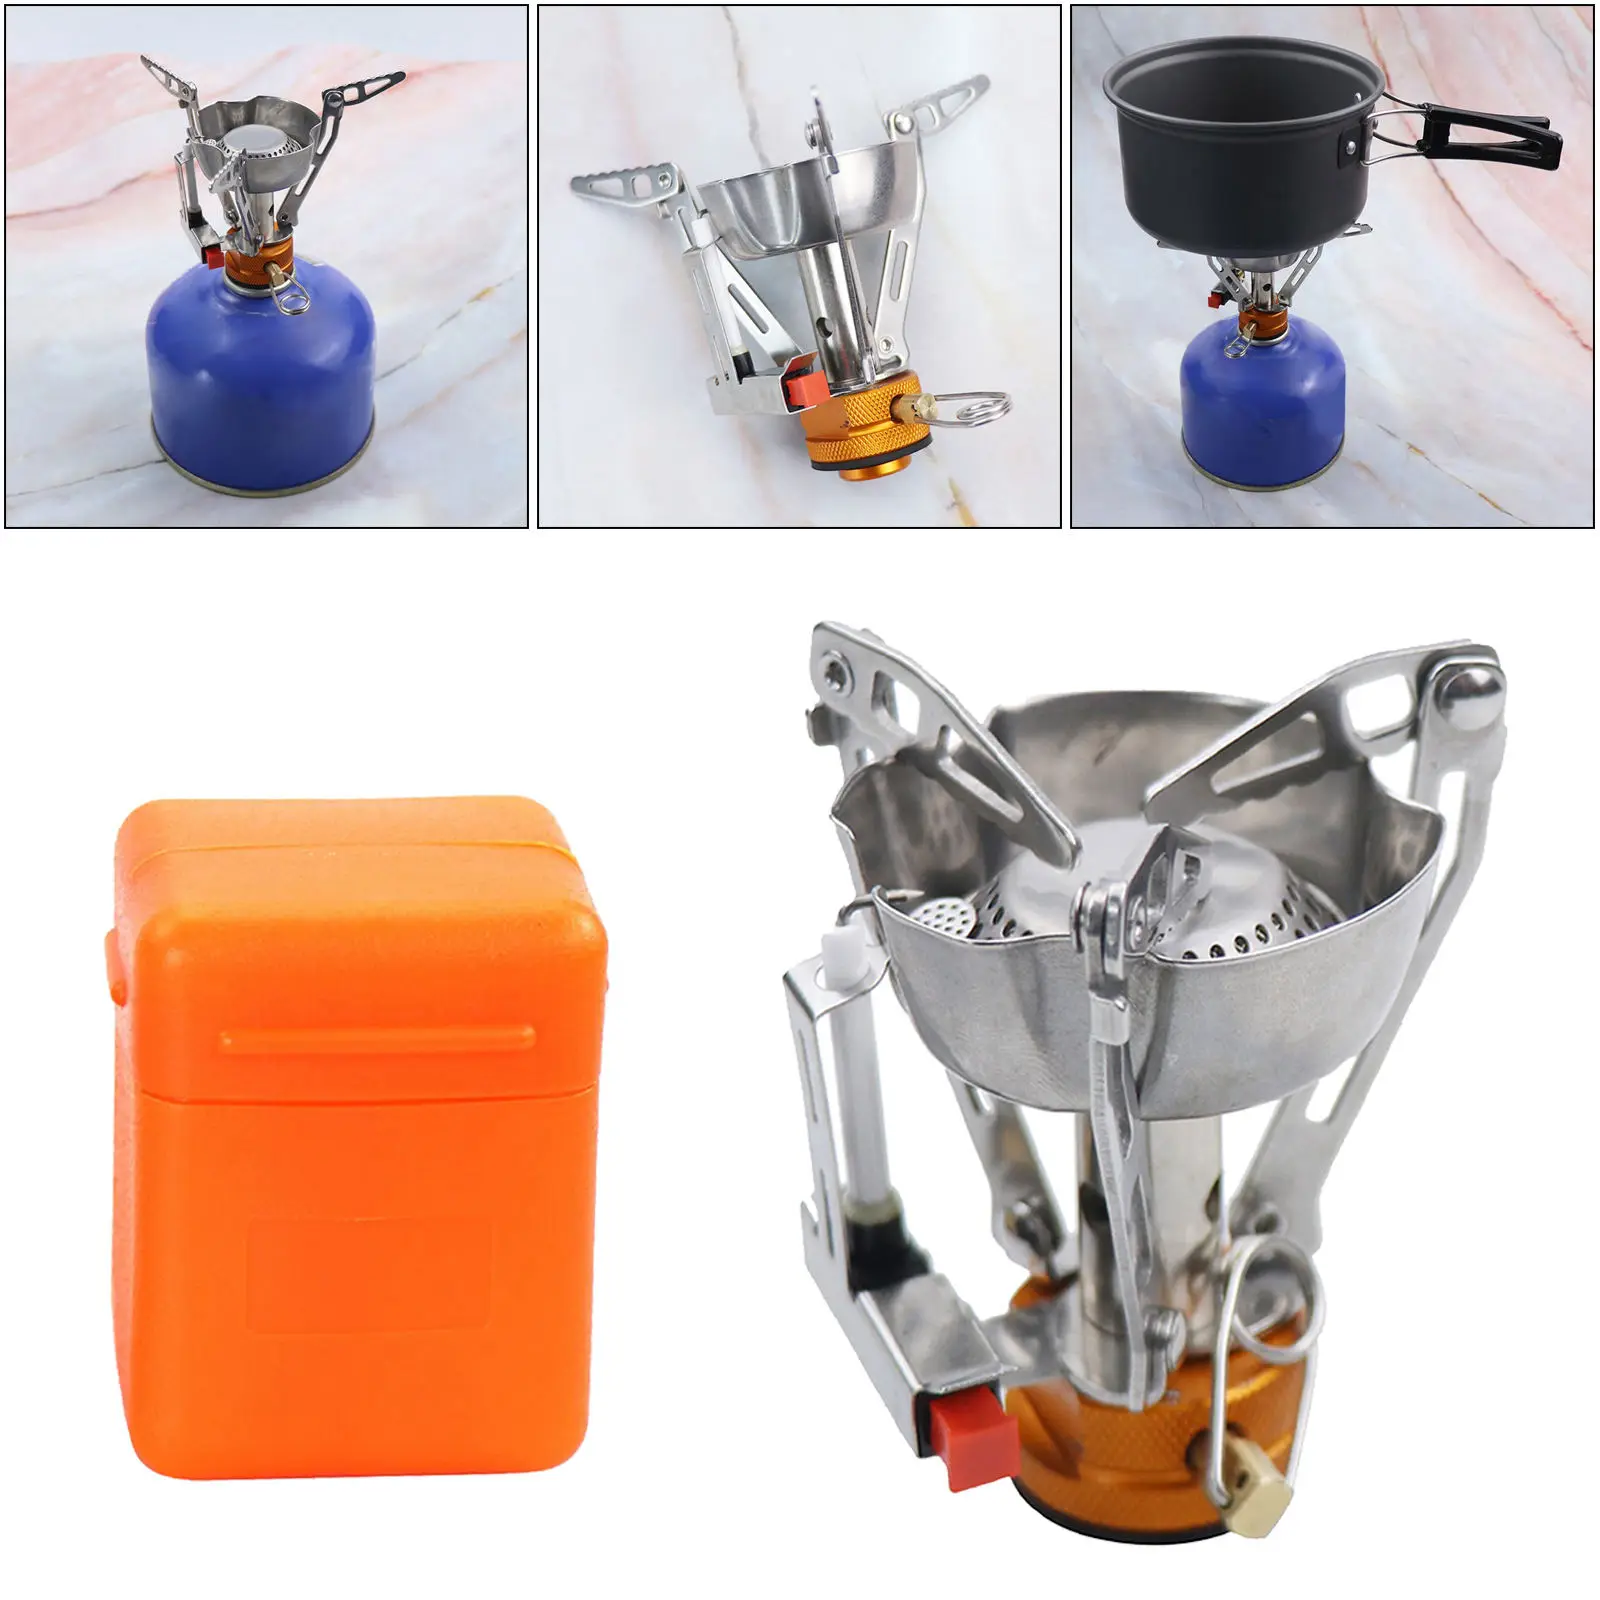 3000W Portable Windproof Camping Gas Stove with Adapter Convertor for Traveling Trekking